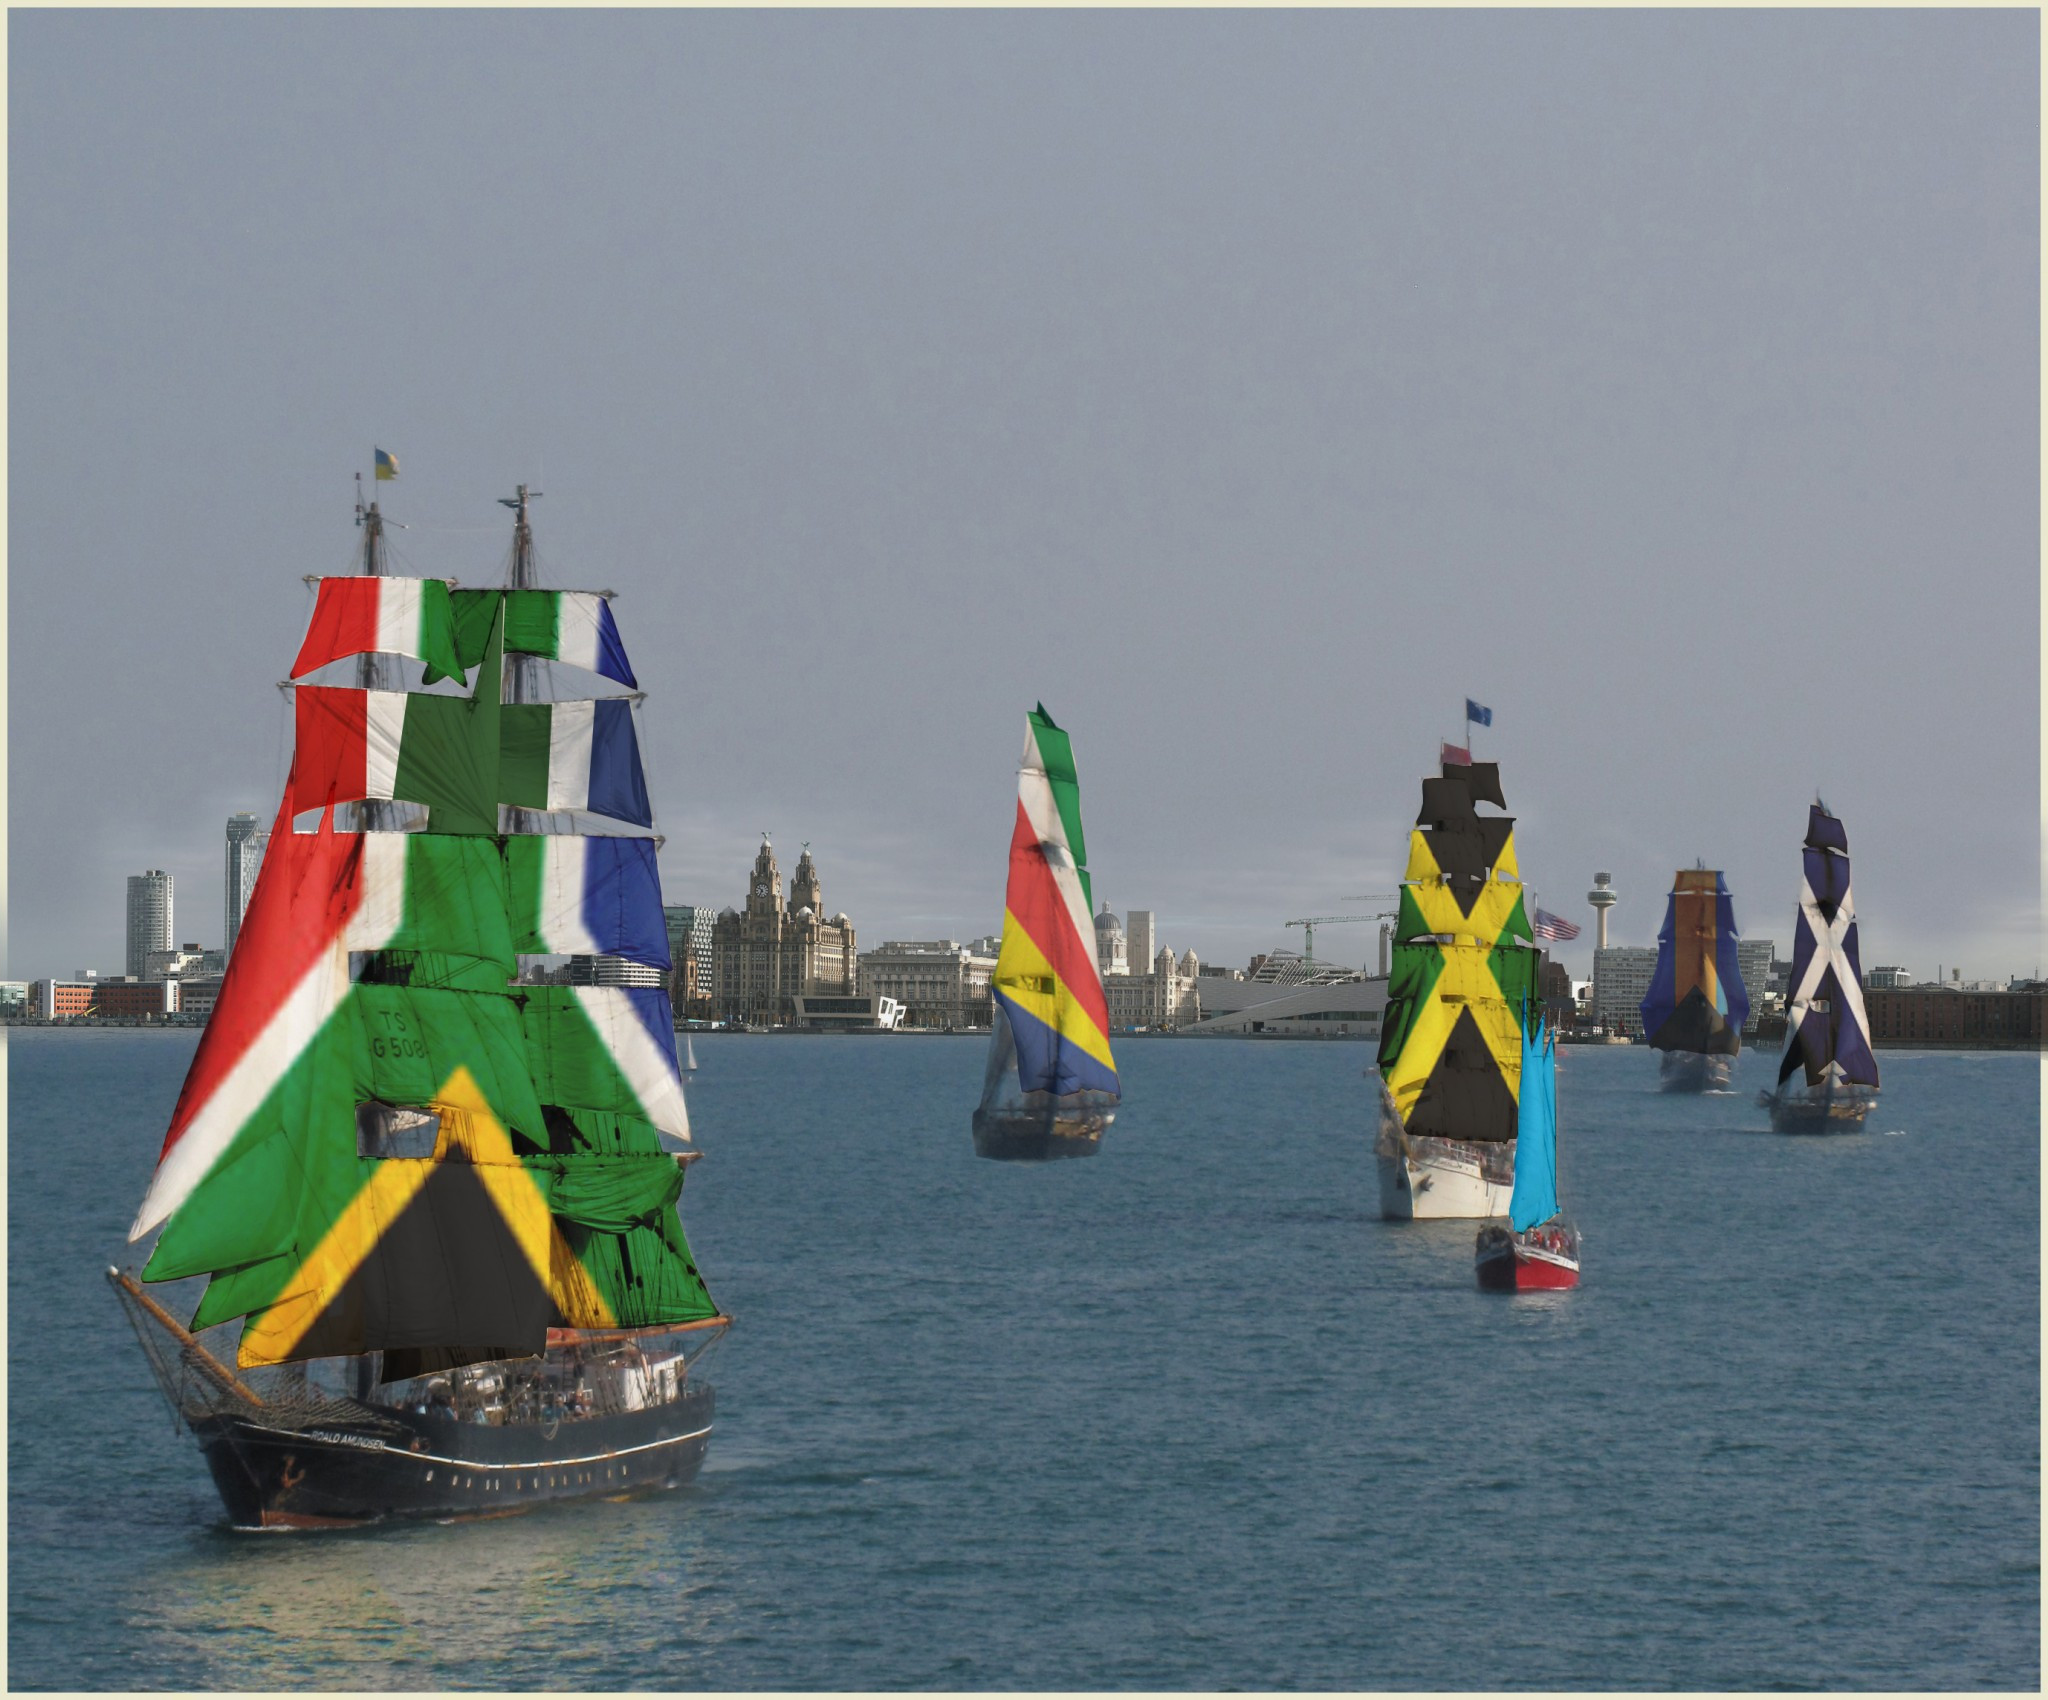 Liverpool has proposed opening the 2022 Commonwealth Games with a "cultural armada" of 71 boats sailing down the River Mersey ©Liverpool 2022